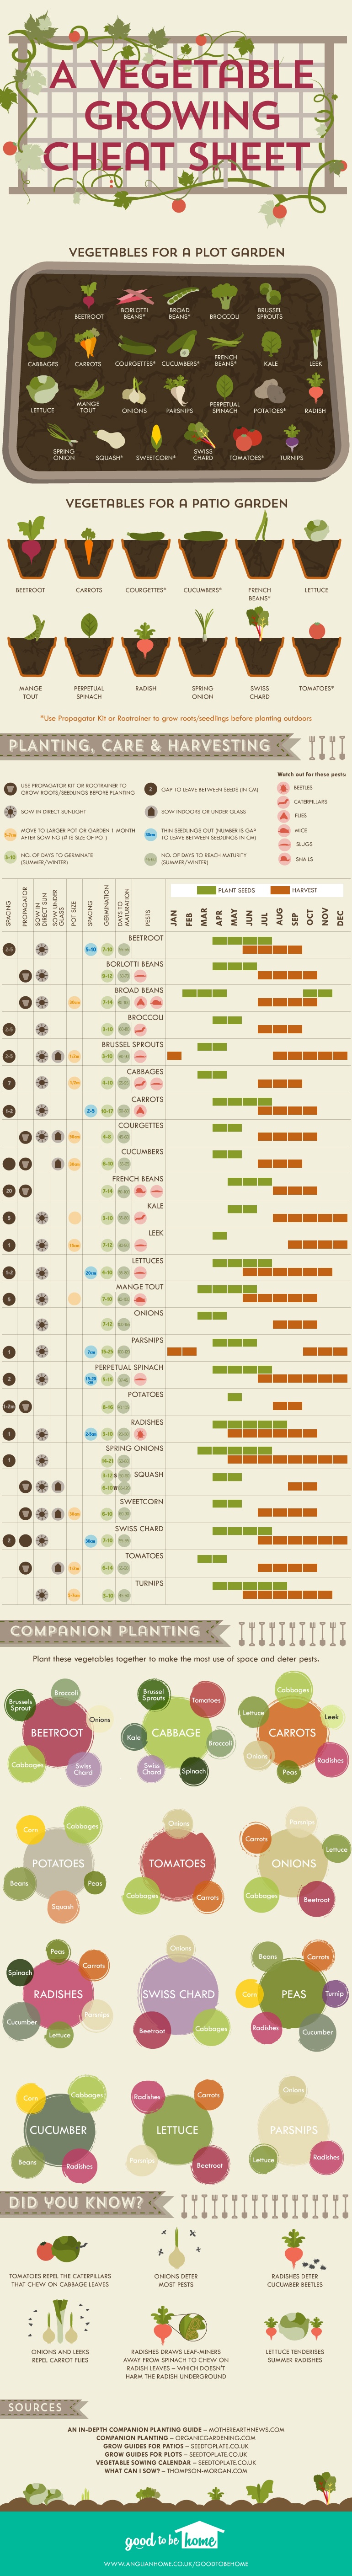 A Vegetable Growing Cheat Sheet - infographic